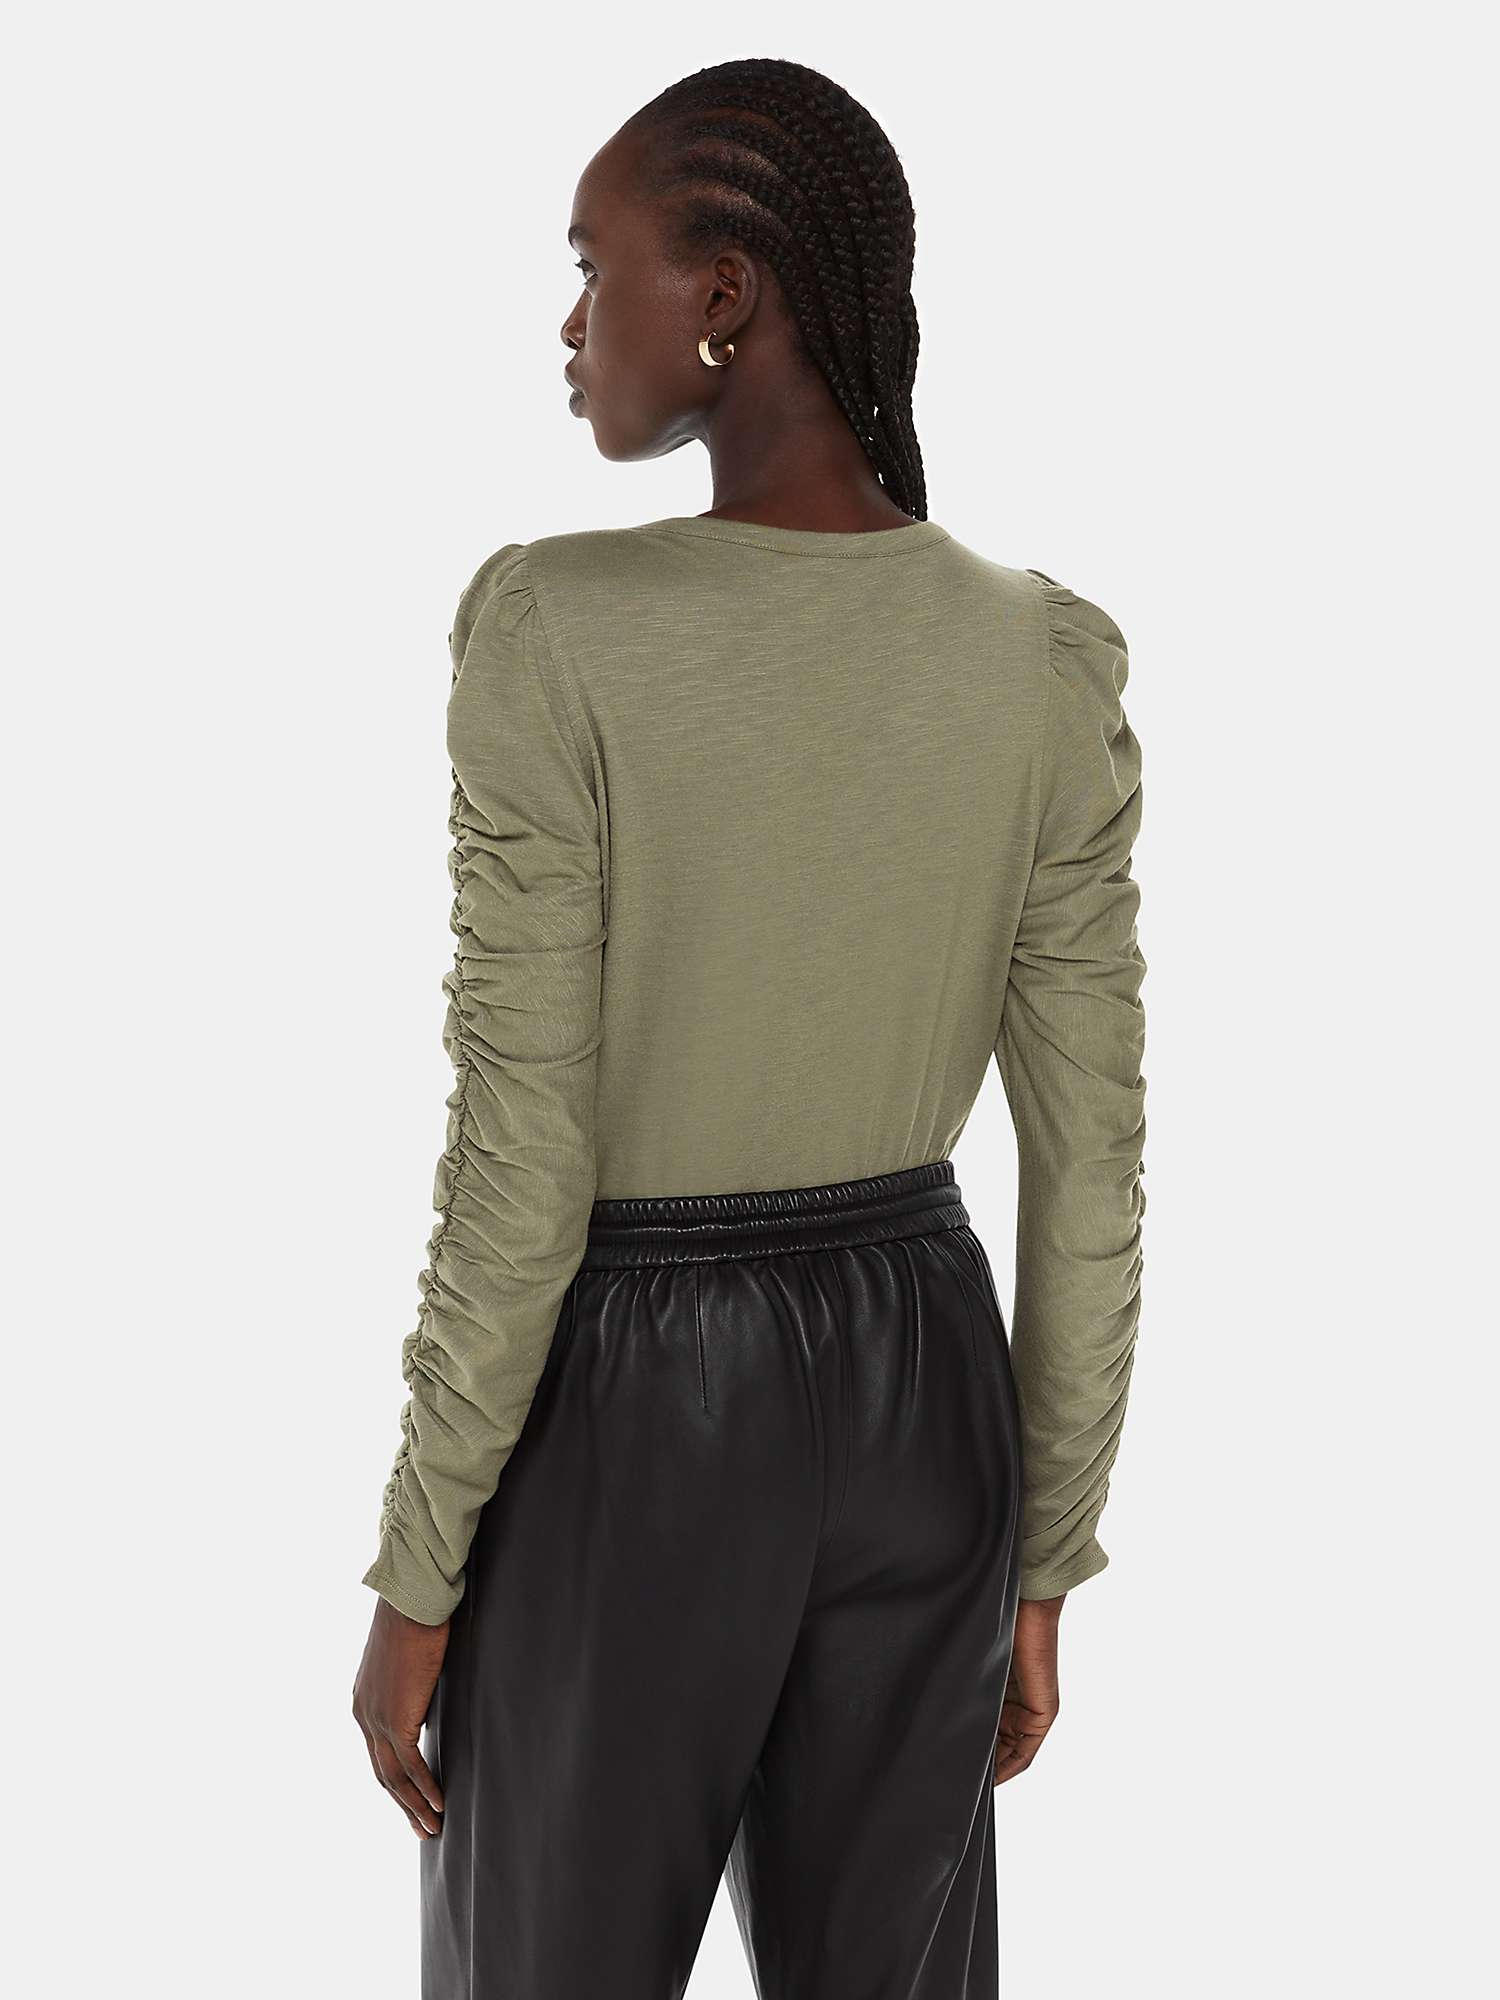 Buy Whistles Ruched Sleeve Top, Khaki Online at johnlewis.com